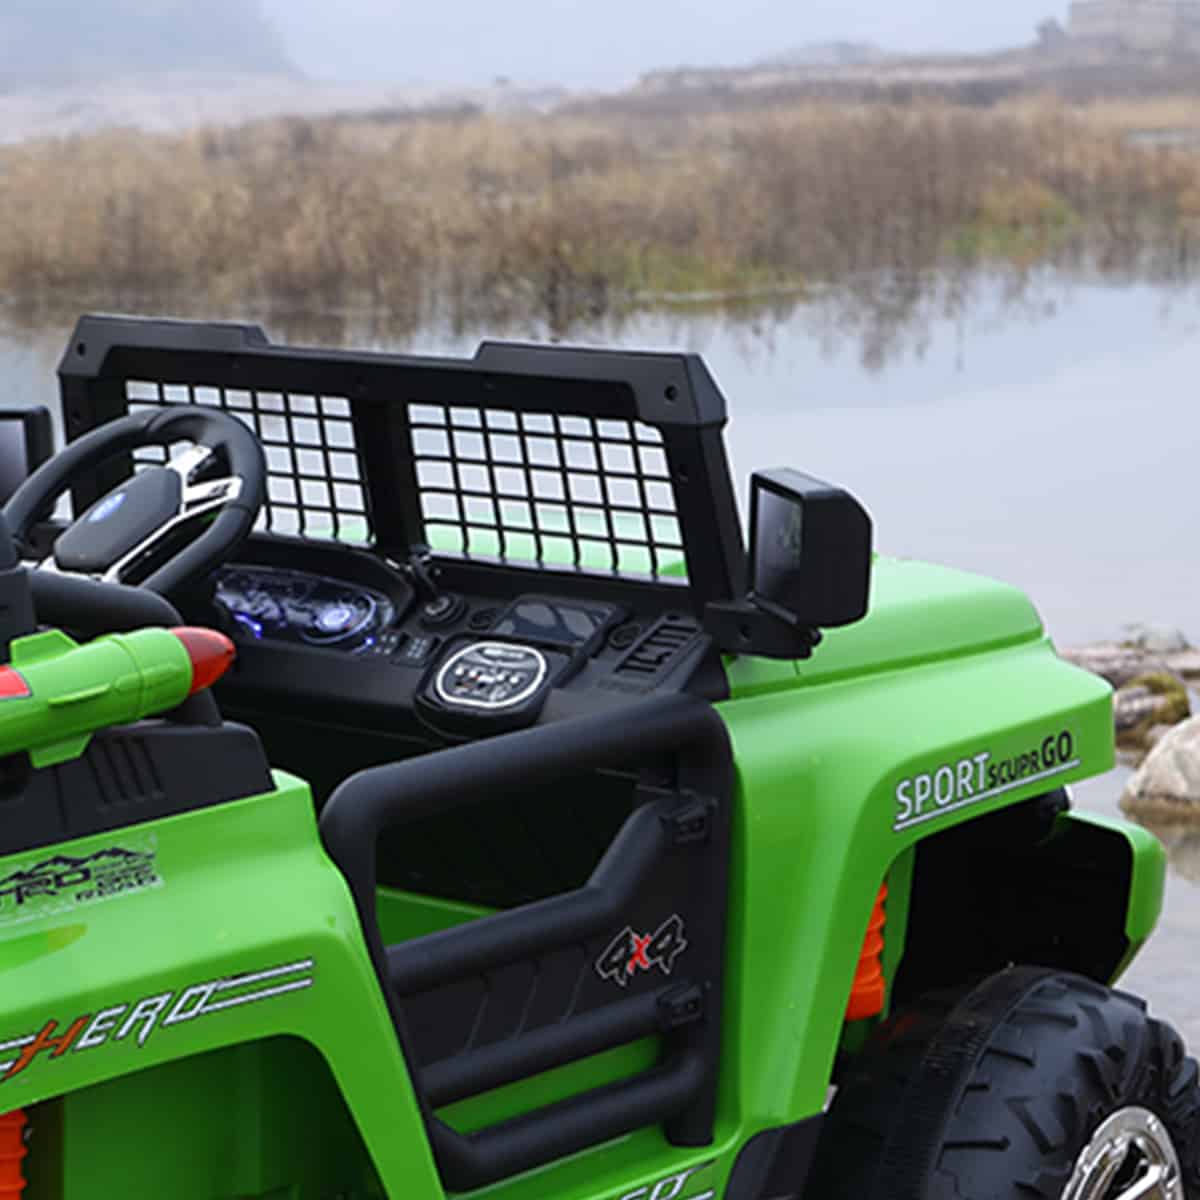 Ride on jeep | model LW-9199 | electric ride on | kids toys 4x4 jeep